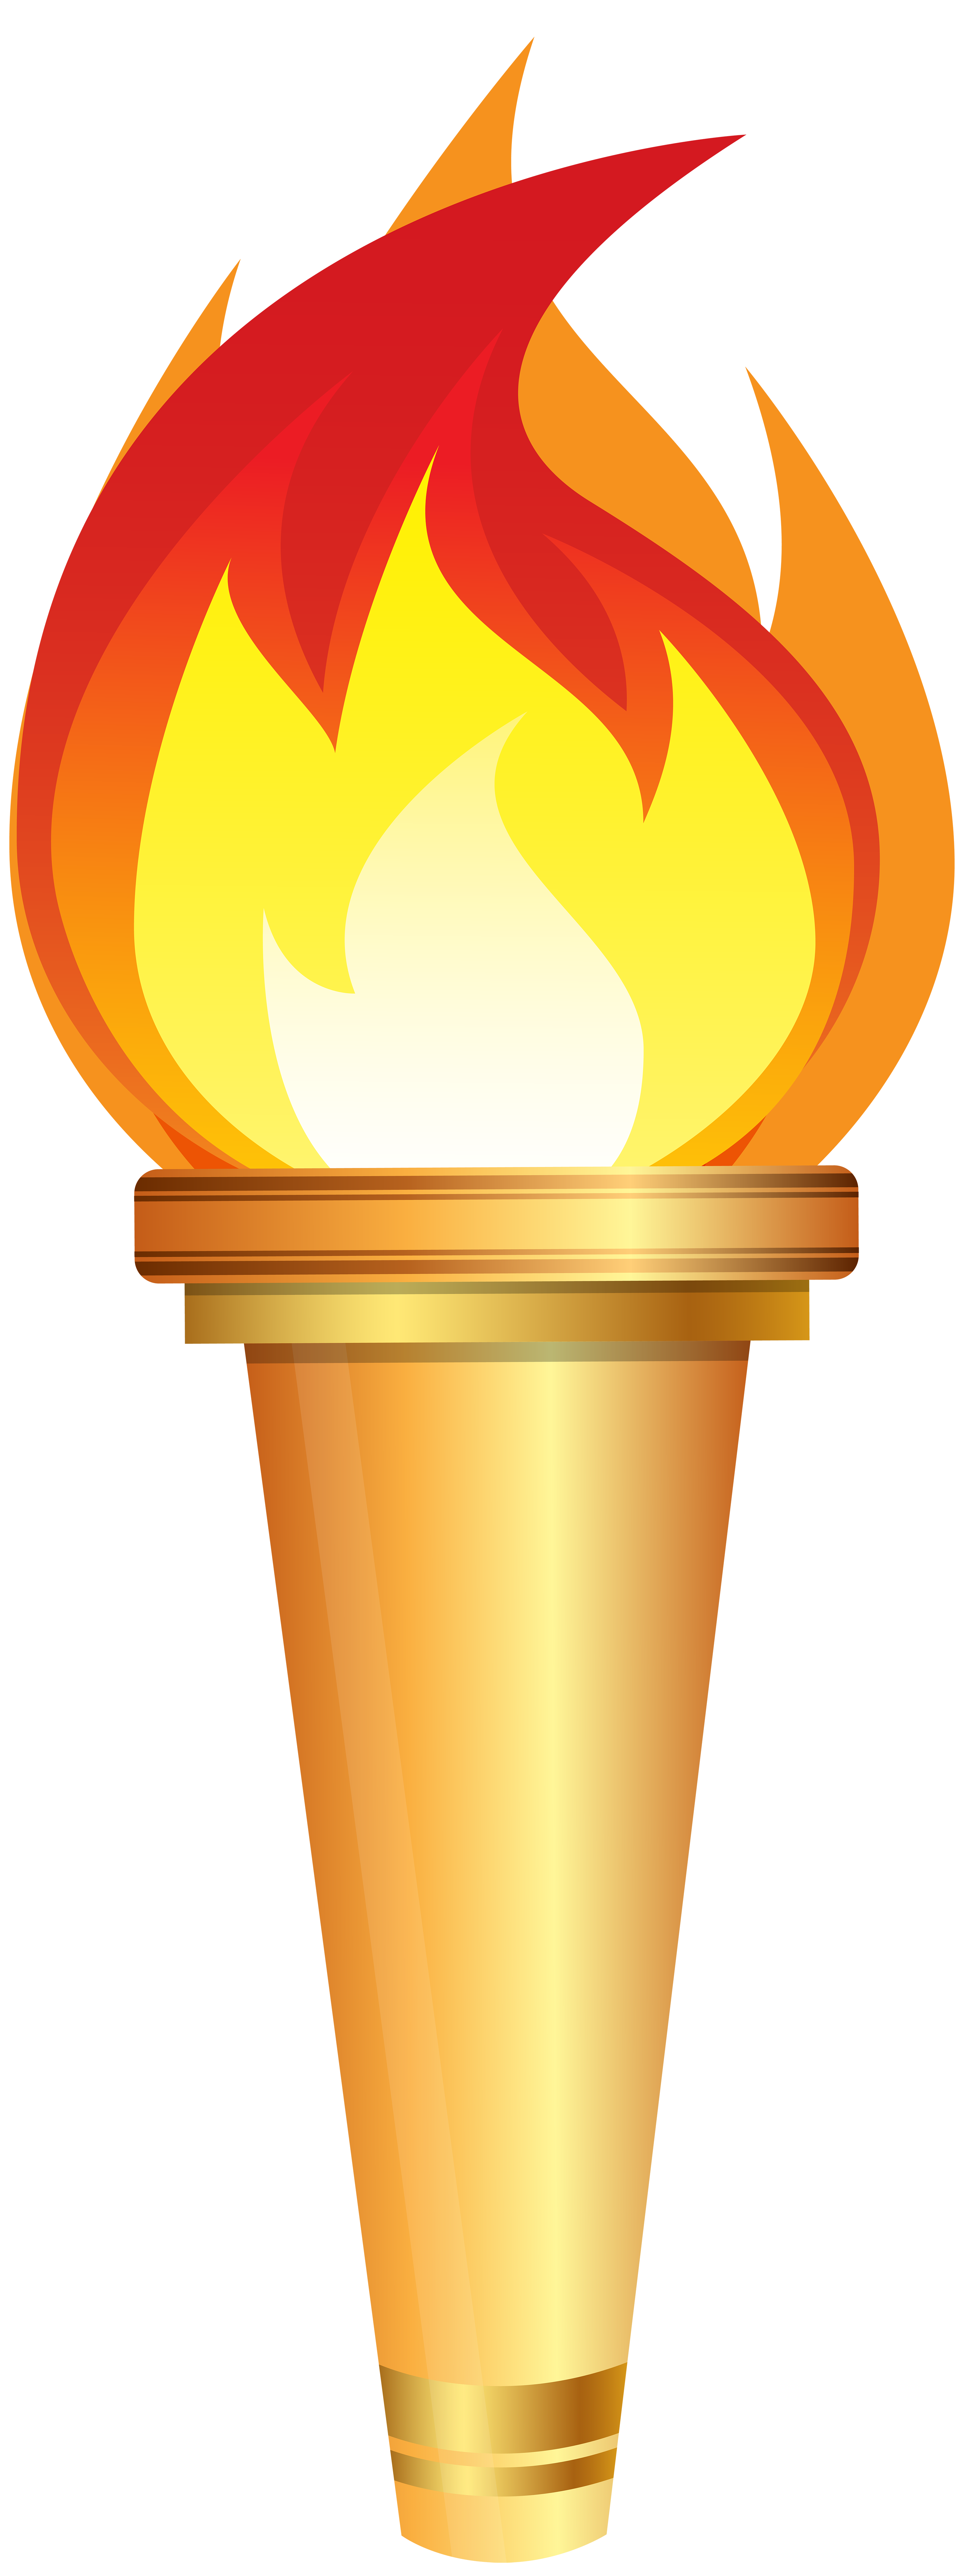 Clipart leaves olympic. Torch png clip art